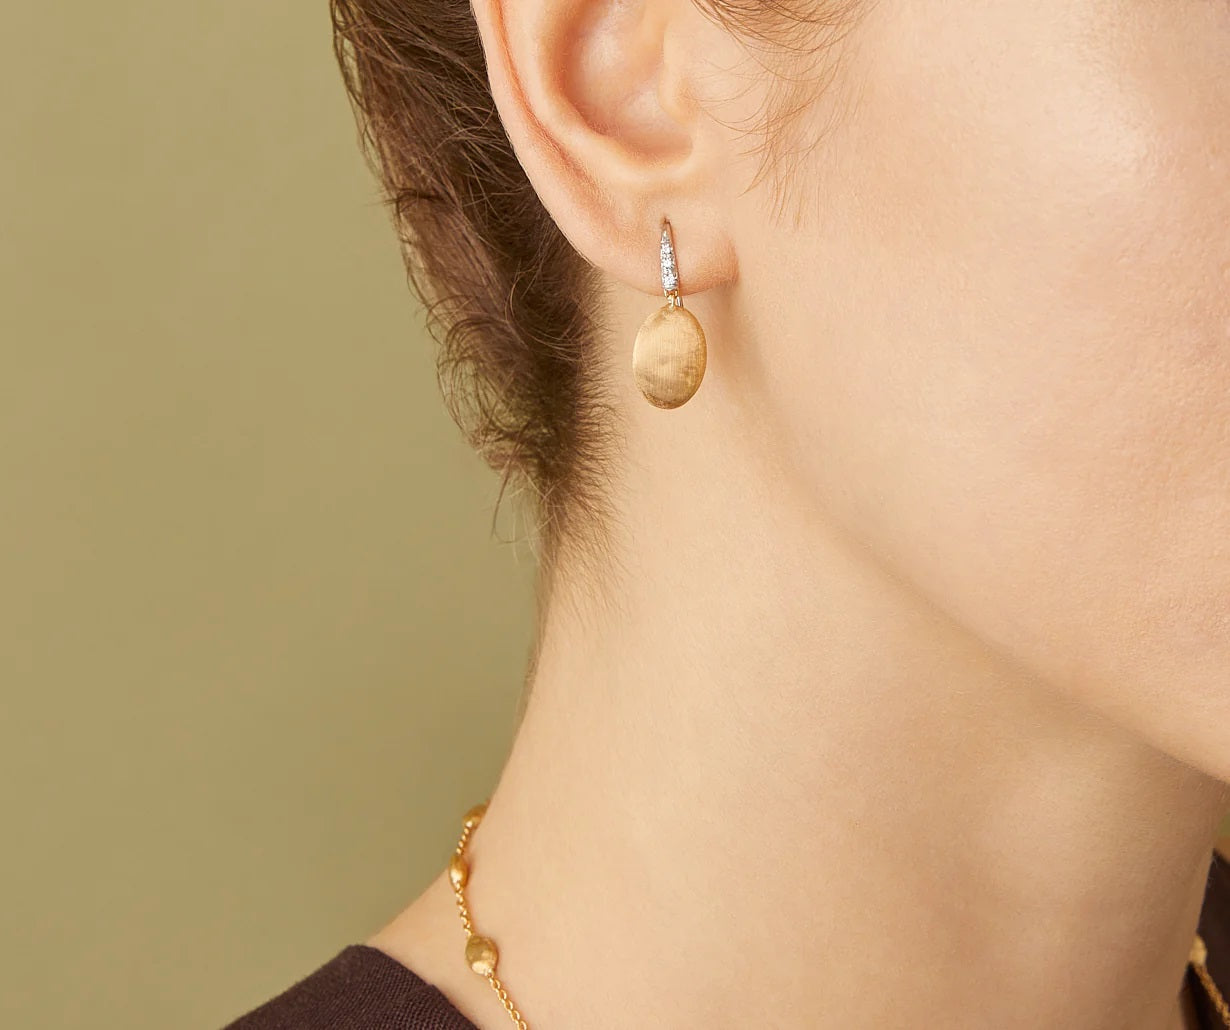 18K YELLOW GOLD & DIAMOND DROP EARRINGS FROM THE SIVIGLIA COLLECTION